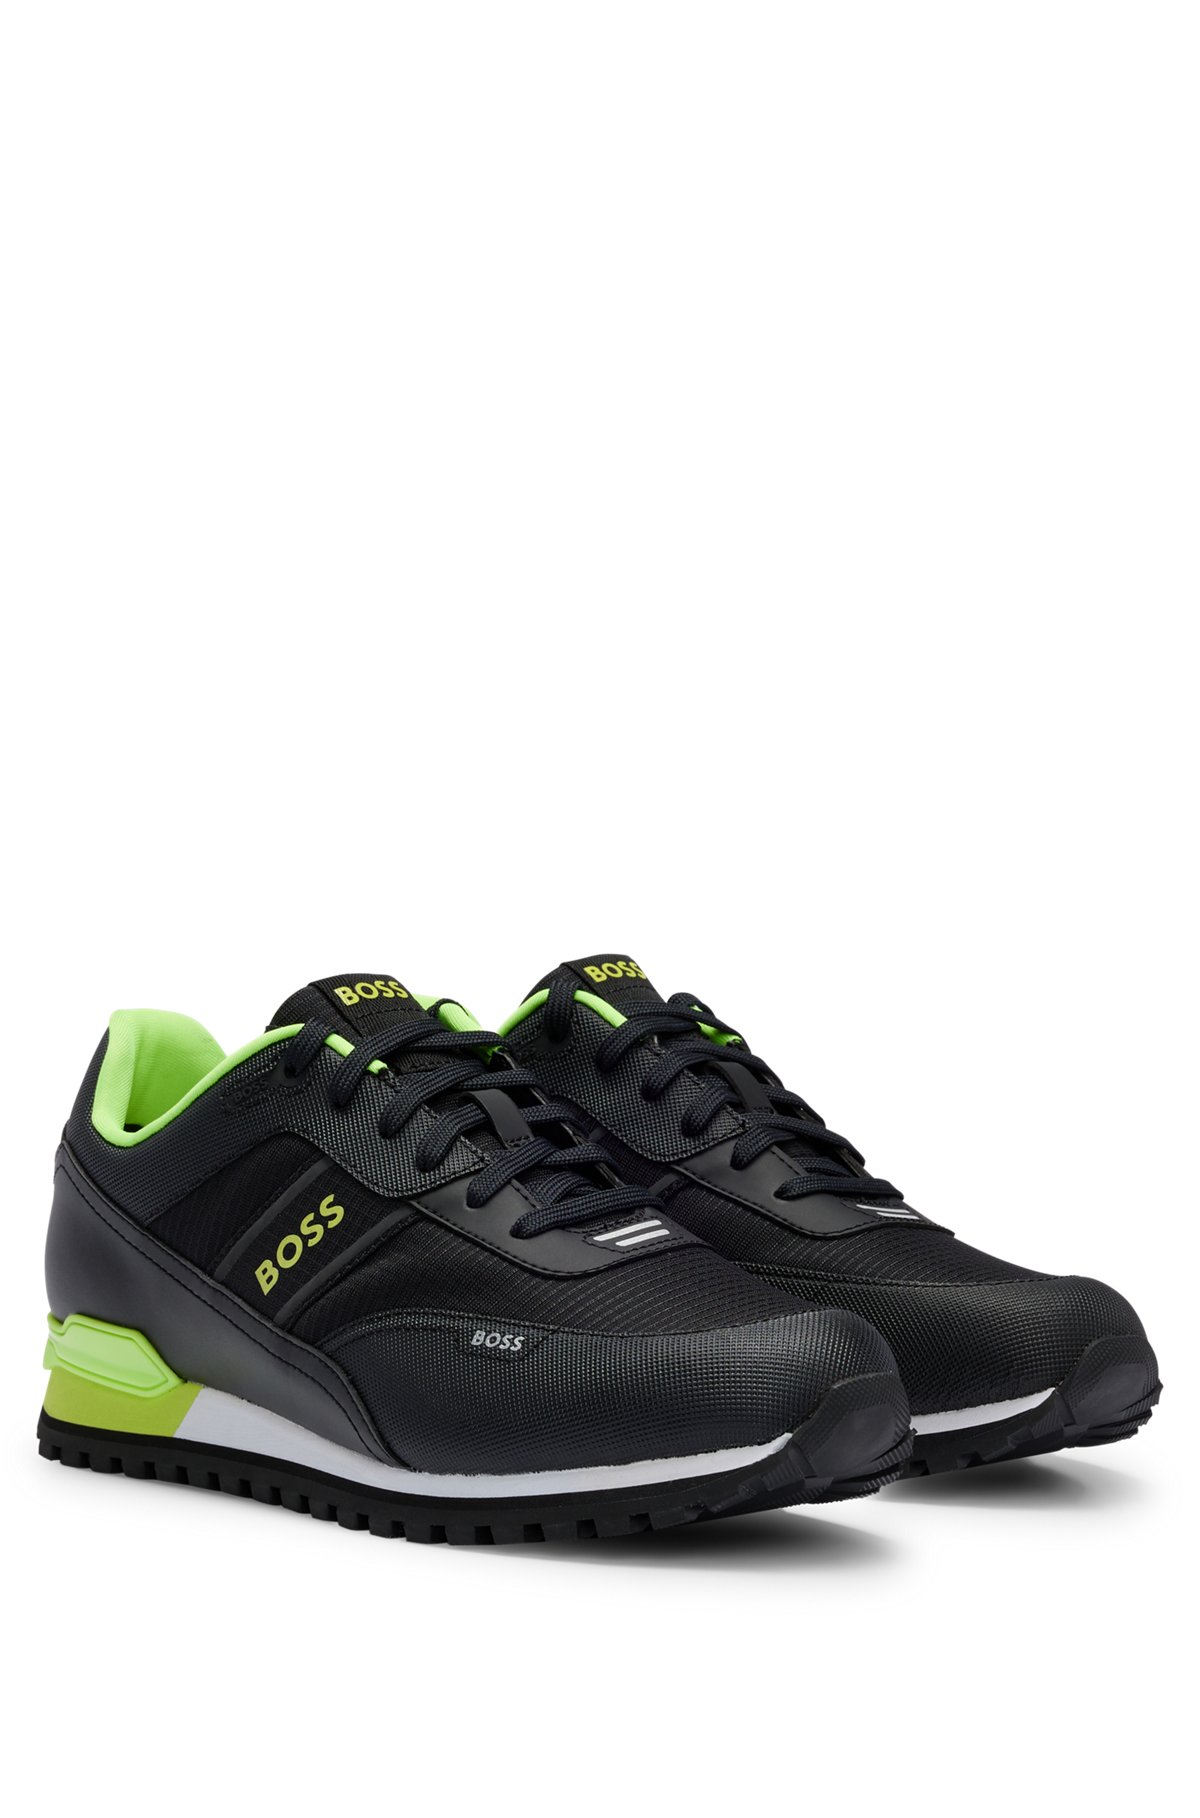 Mixed-material trainers with logo details, Black